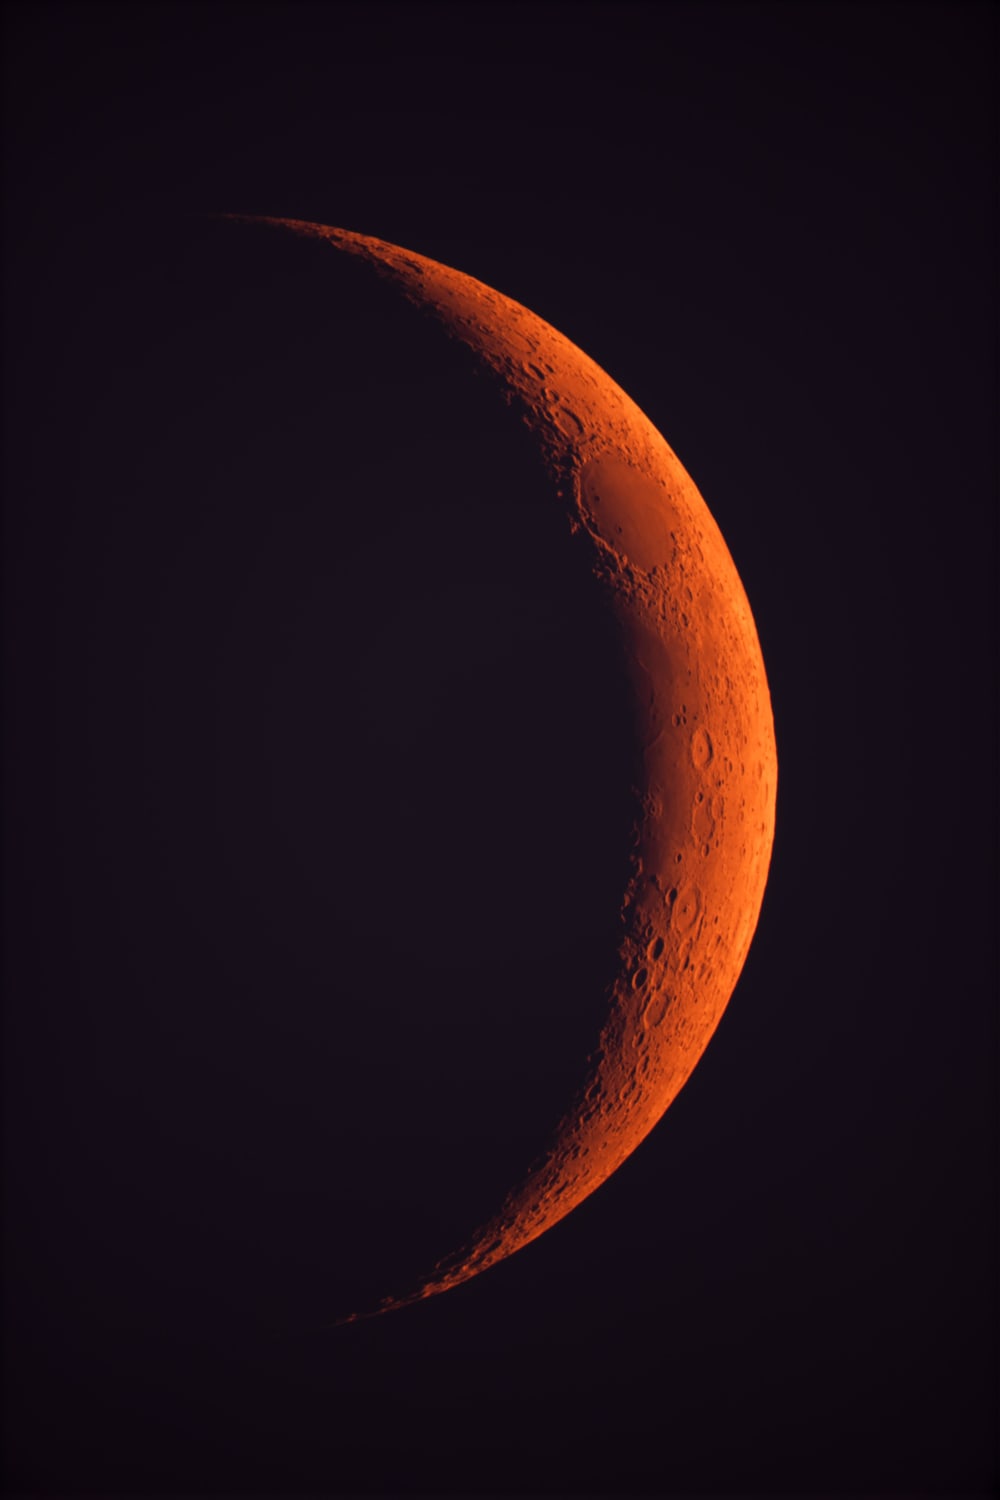 The fires in northern California are so bad that we all were sent home from work yesterday. Those same unhealthy particles in the air are causing light from the sun/moon to scatter way more than normal, turning them red. Here is the moon last night, color unedited.